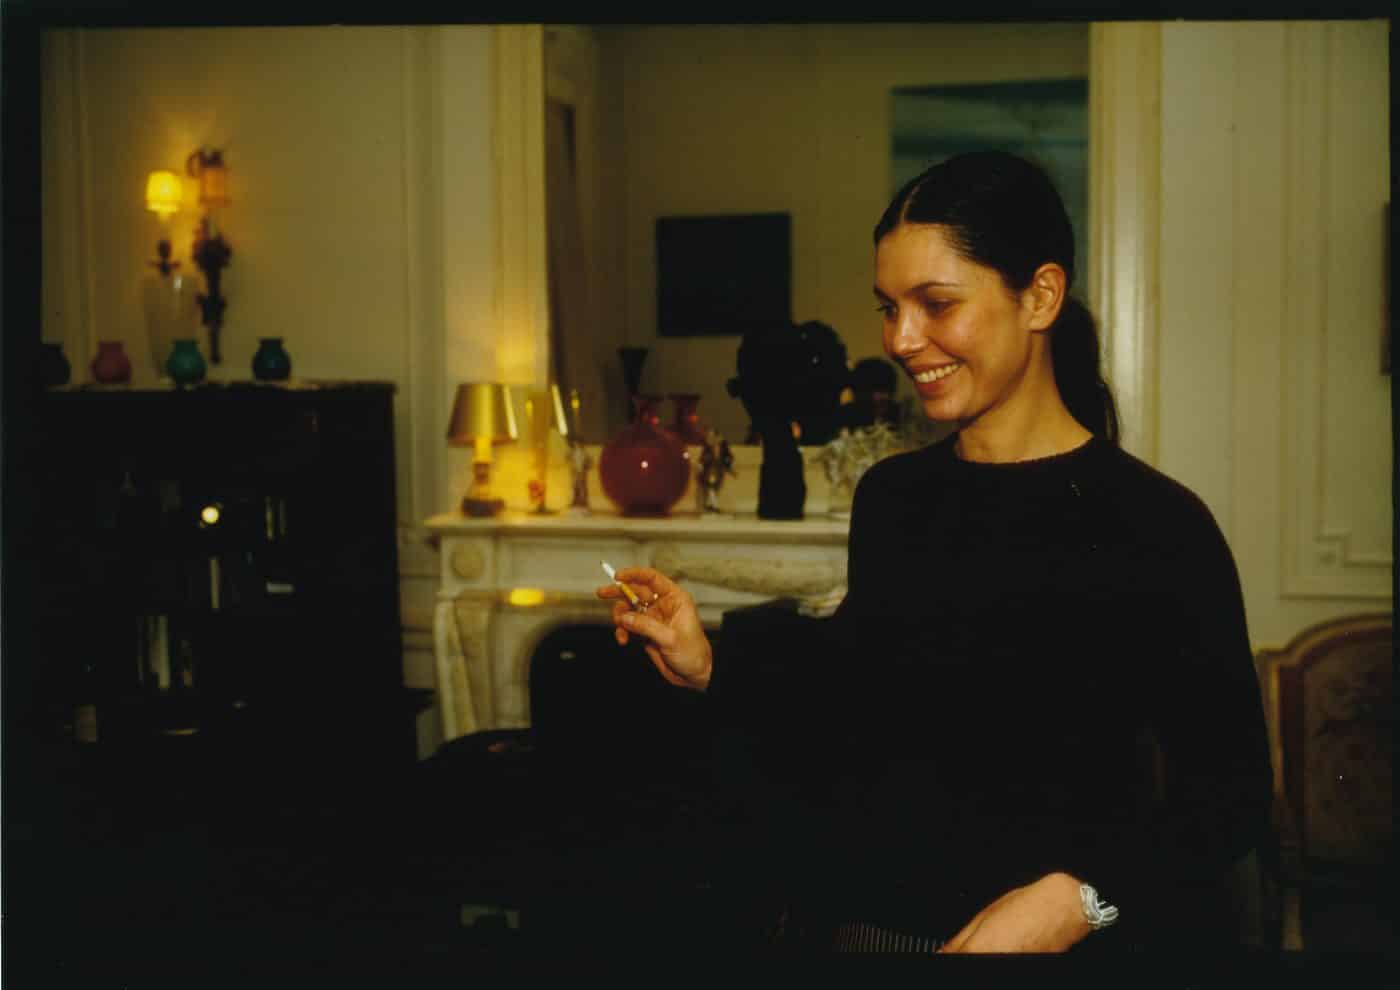 Nan Goldin shot this portrait of Condo in her home.